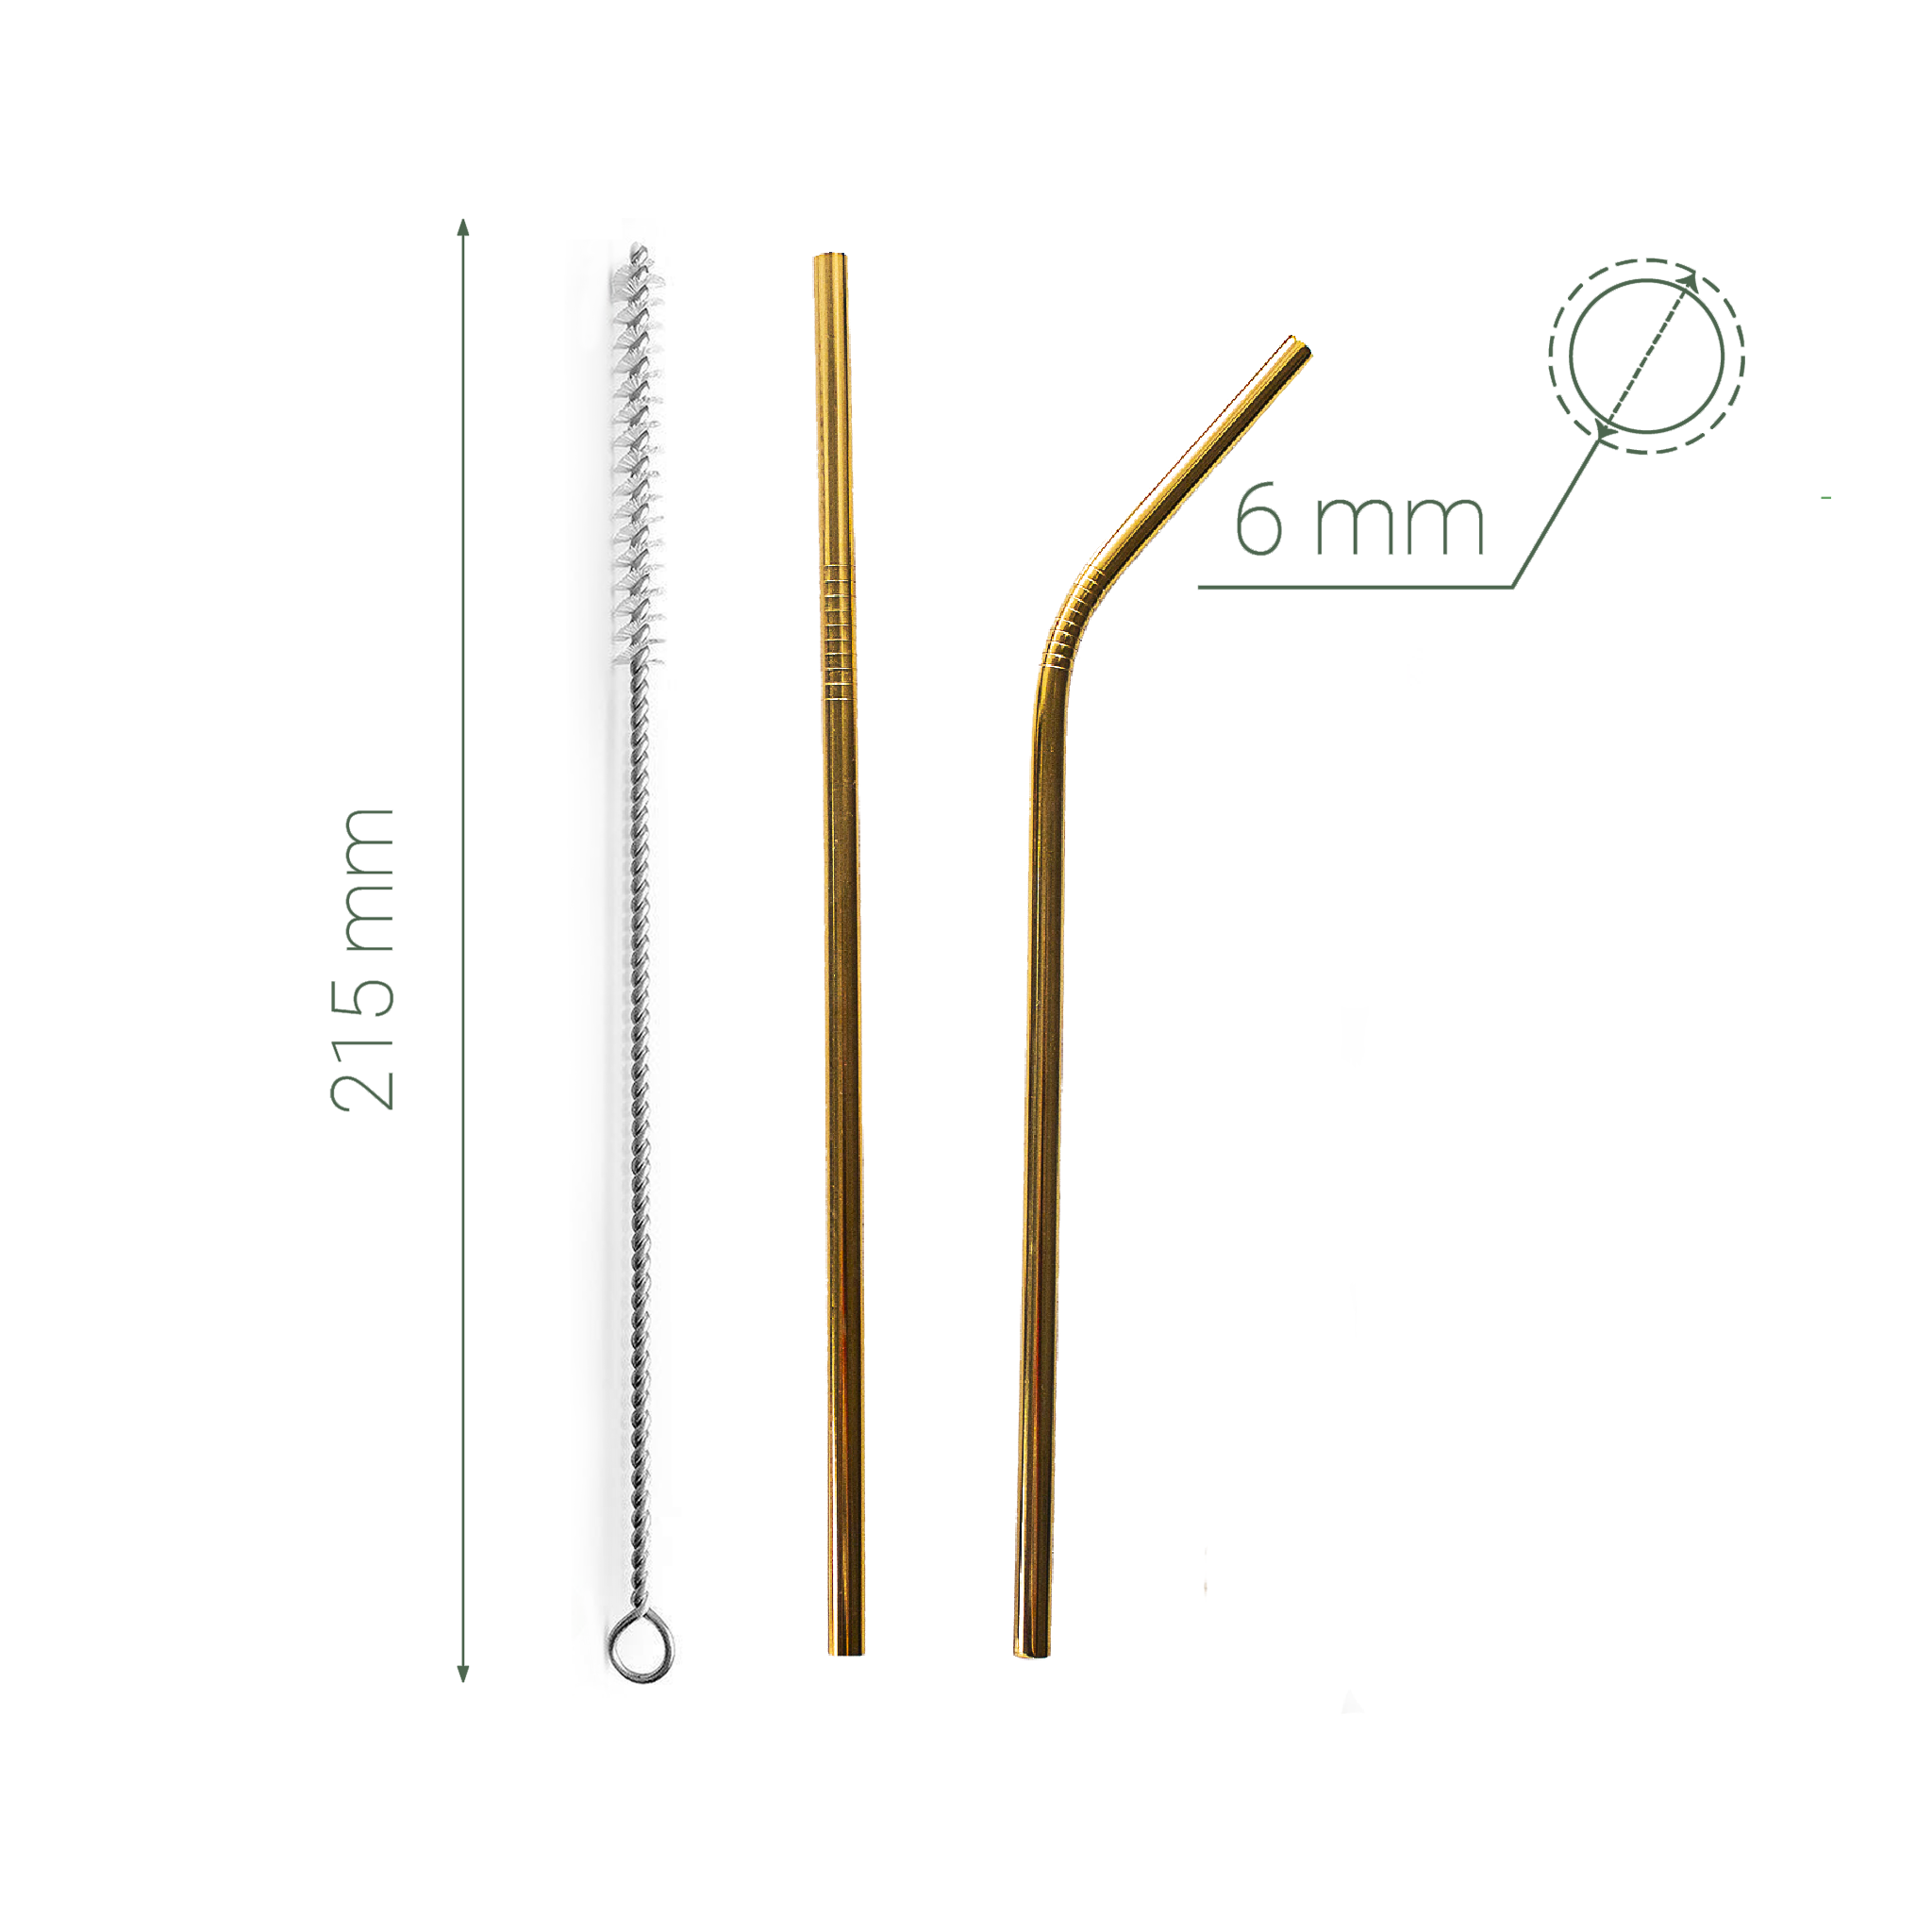 Stainless Steel Drinking Straws - Gold  - x 2 - Eco Kindly